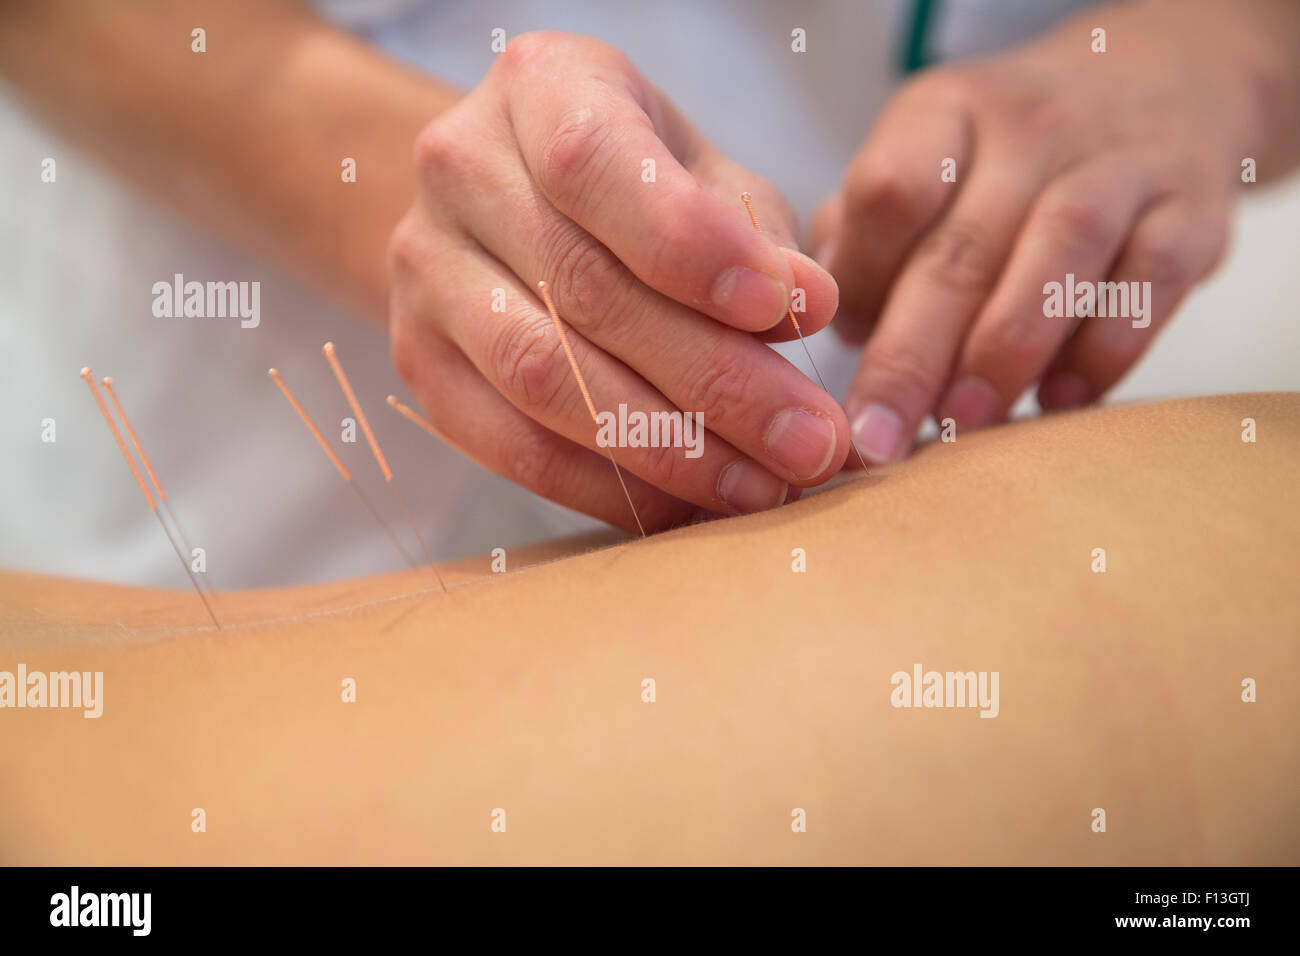 Acupuncture needles on back of a young woman Stock Photo